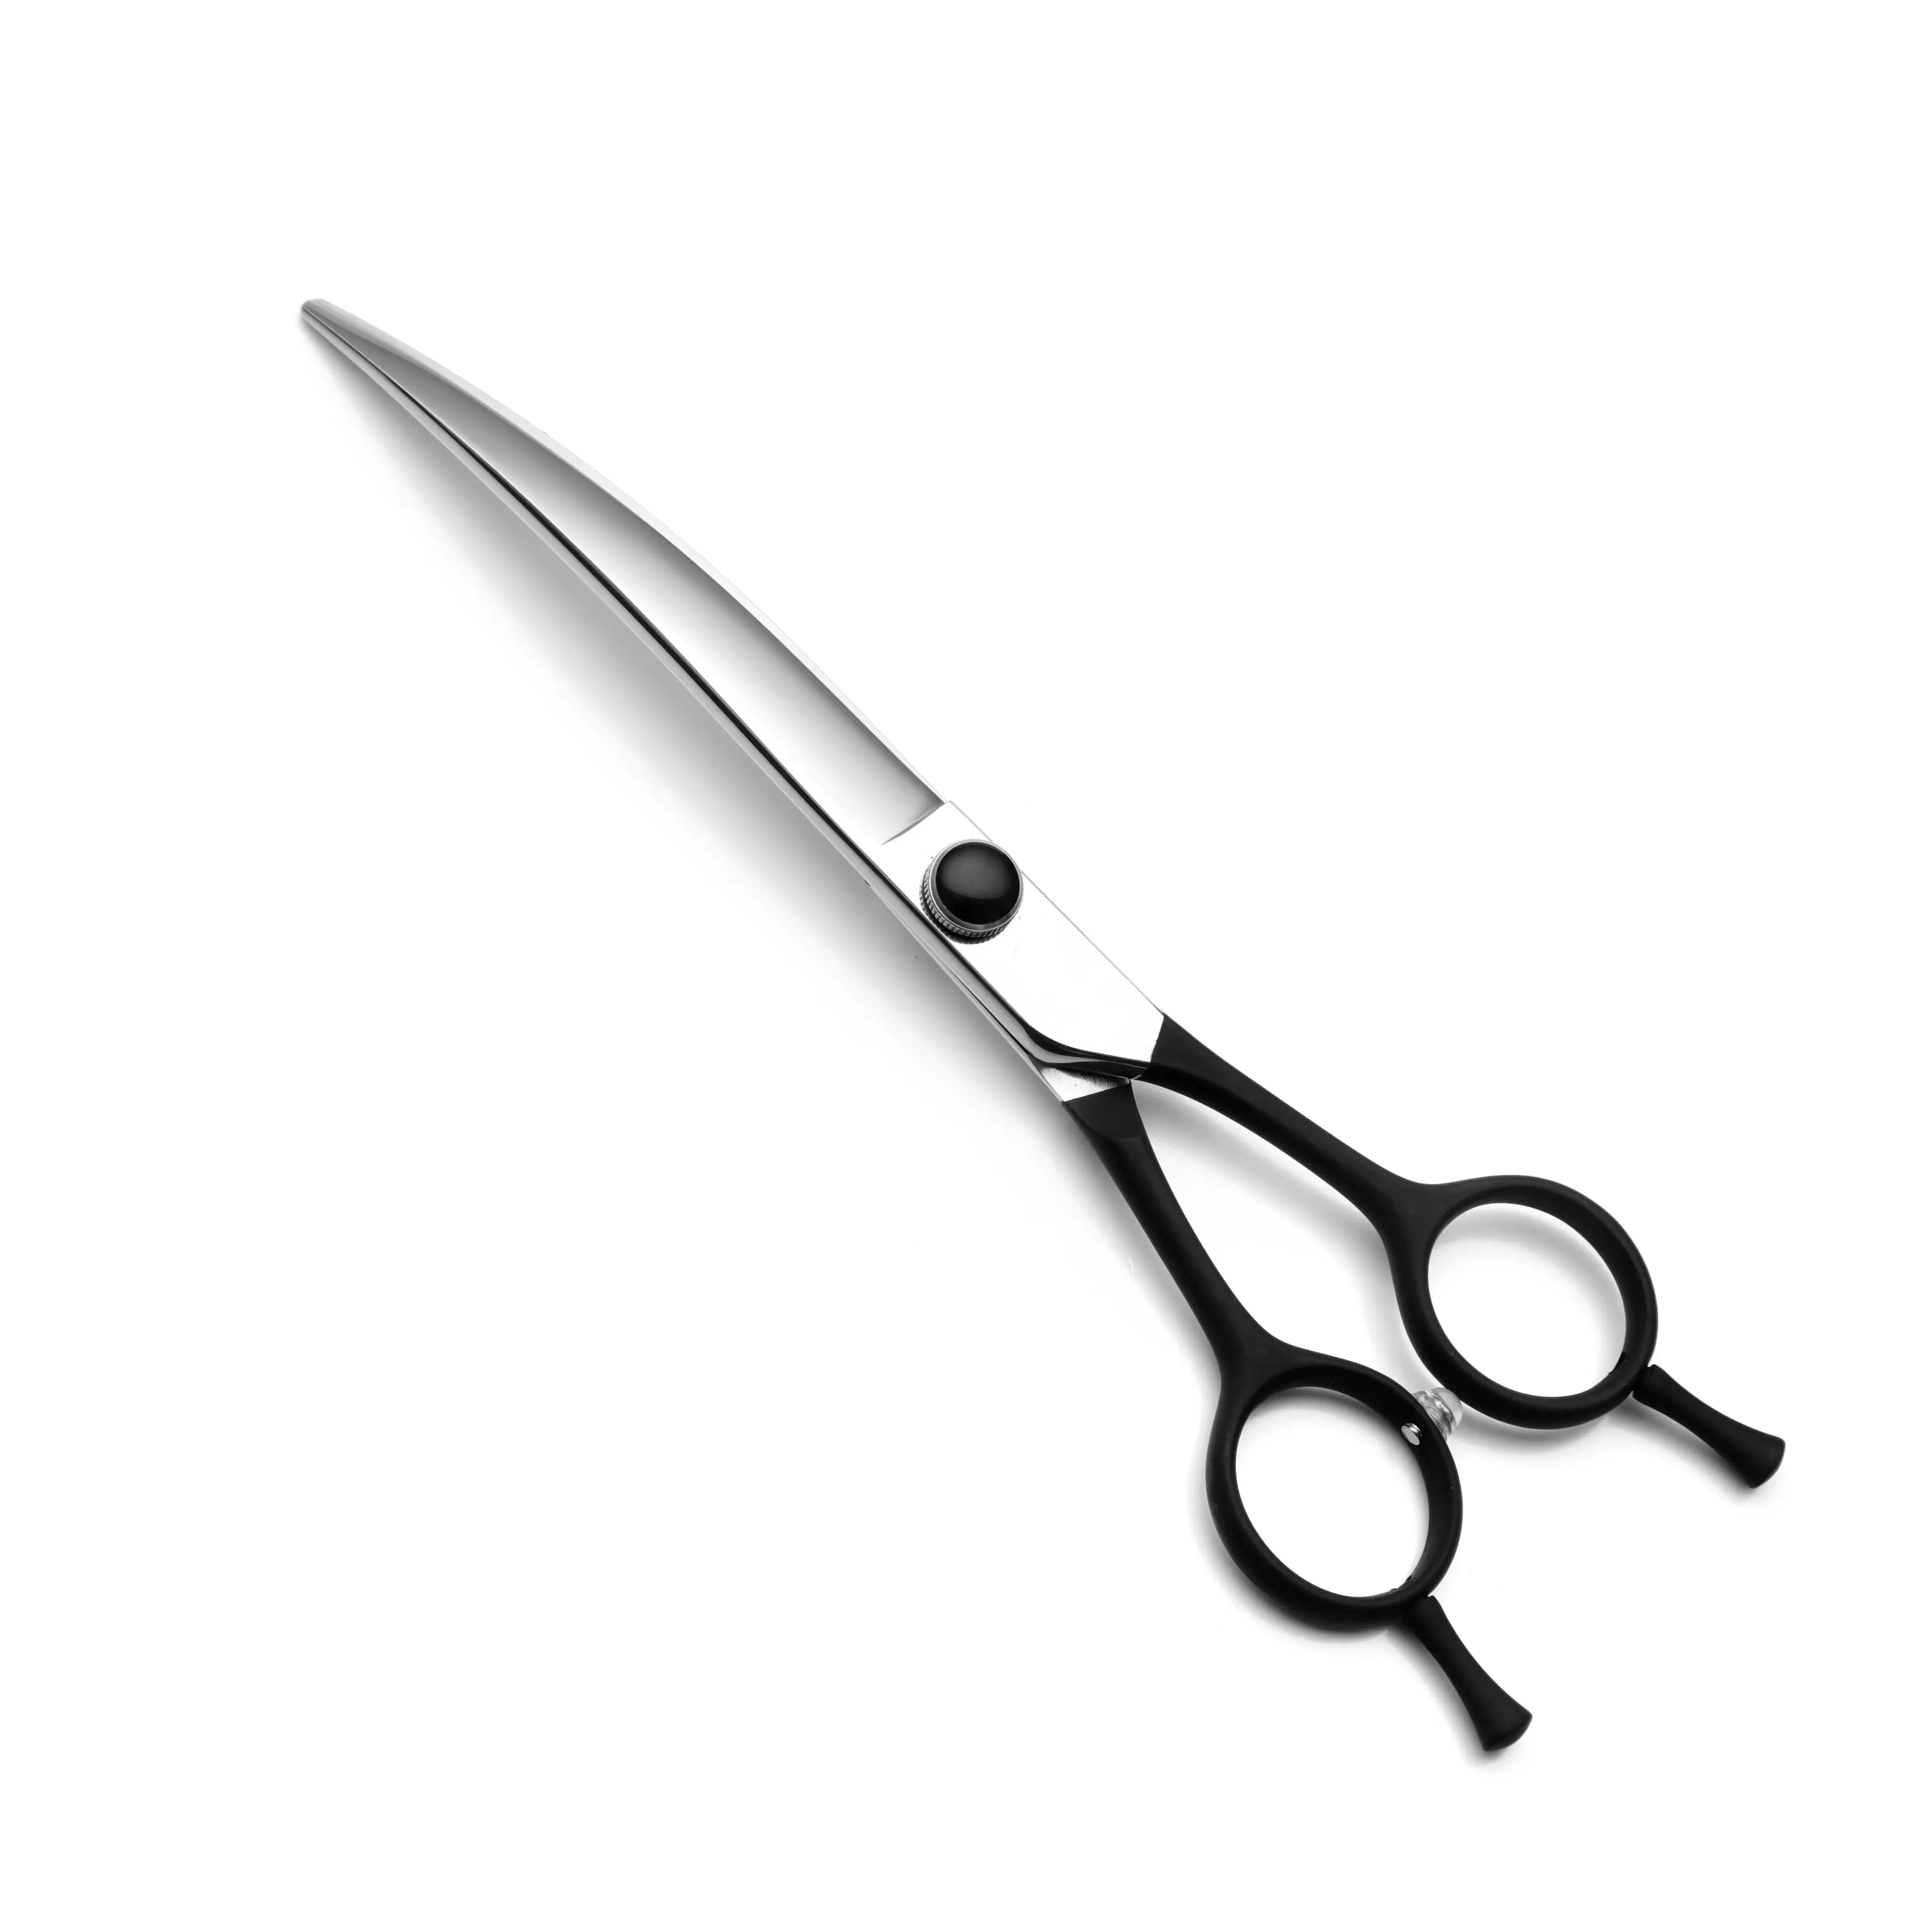 New Fashion Stainless Steel Professional Pet Grooming Scissors Set